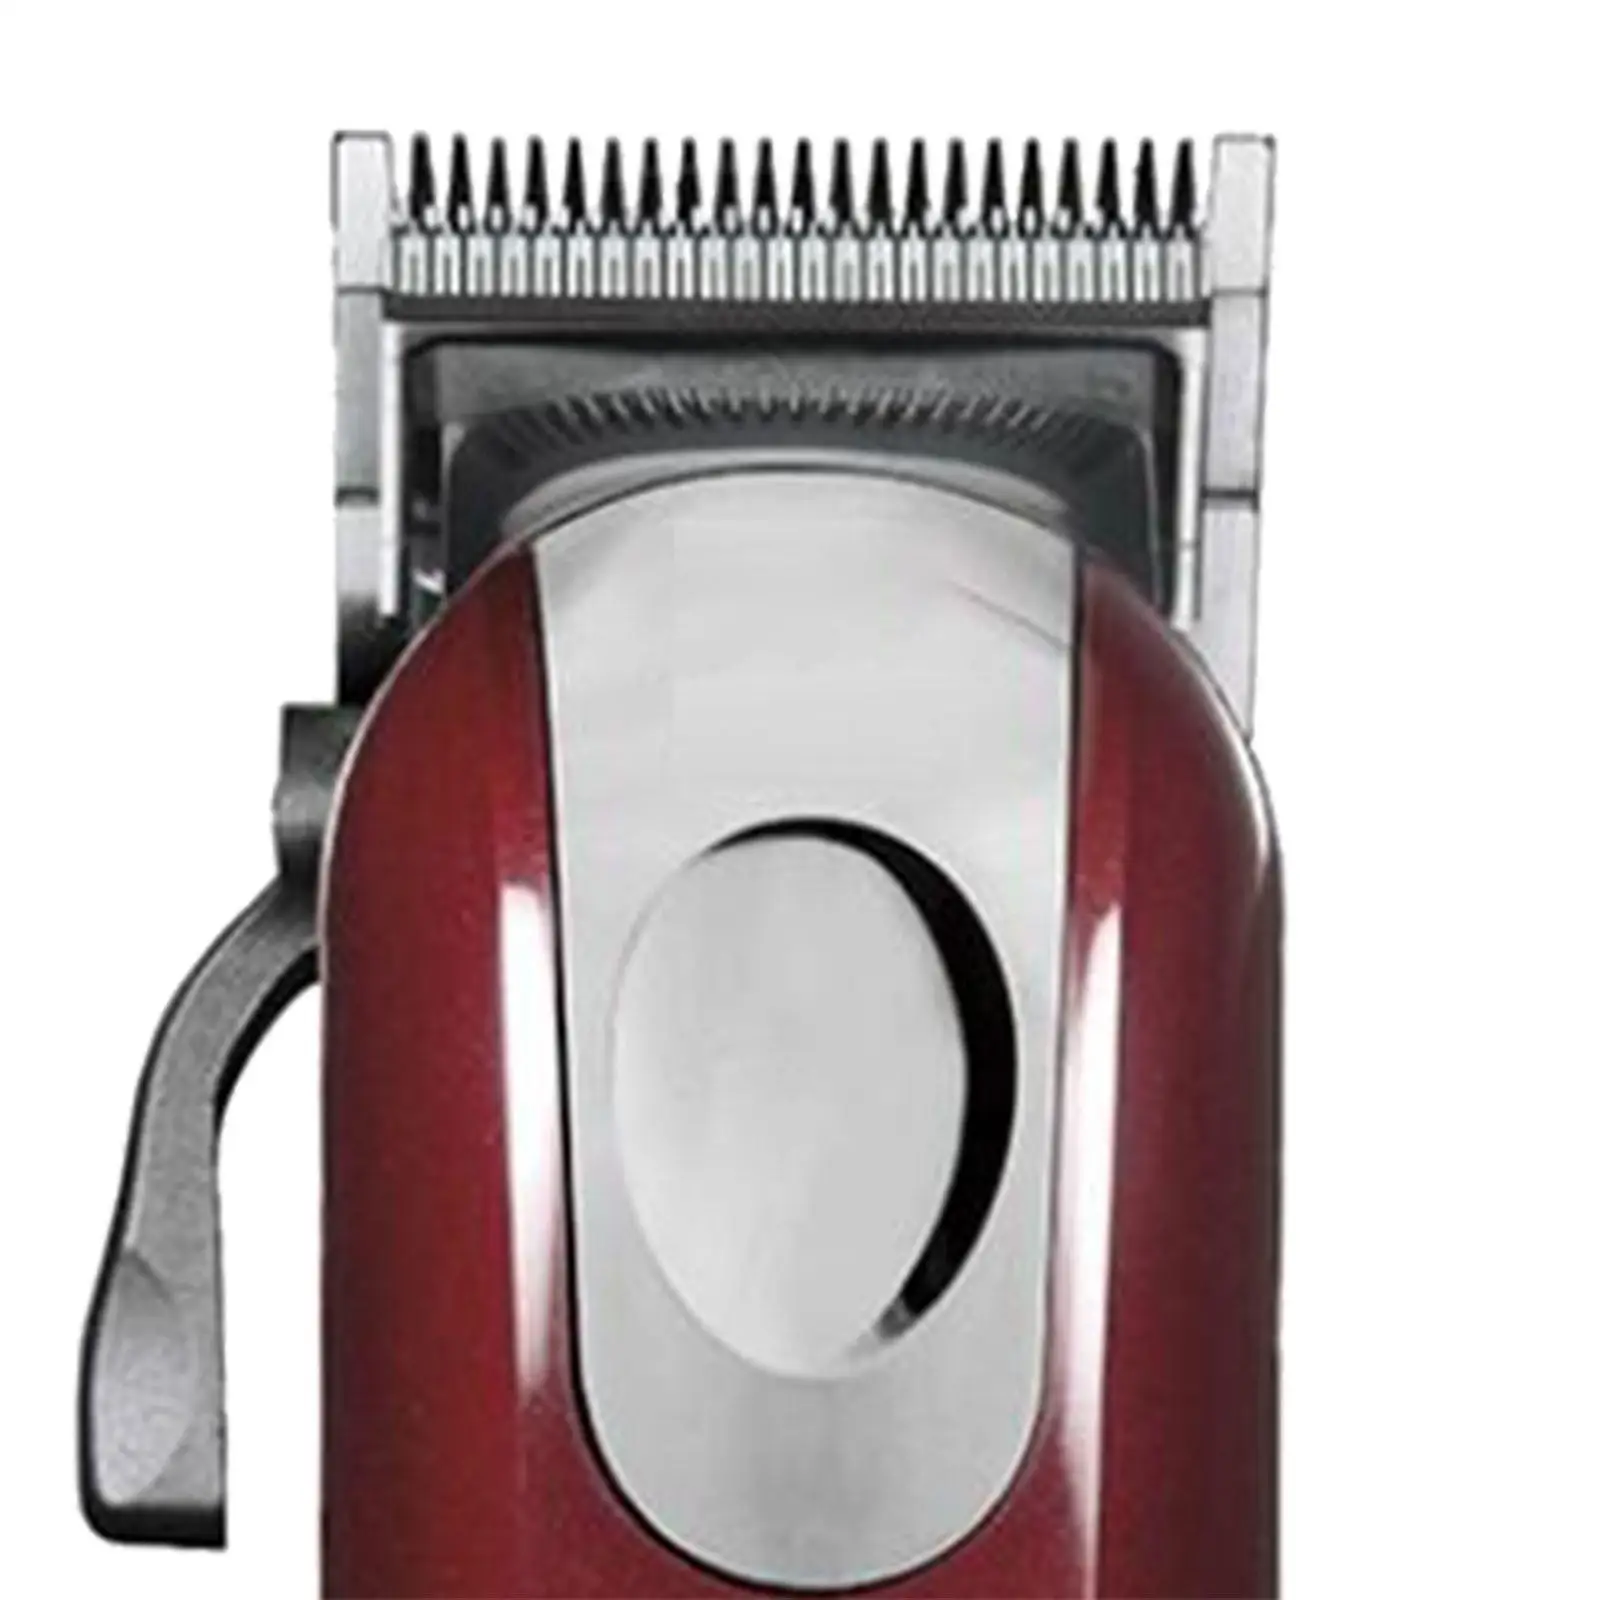 Electric Hair Clipper 8148 EU Power Adapter Multifunctional for Men Professional Cord and Cordless Grooming